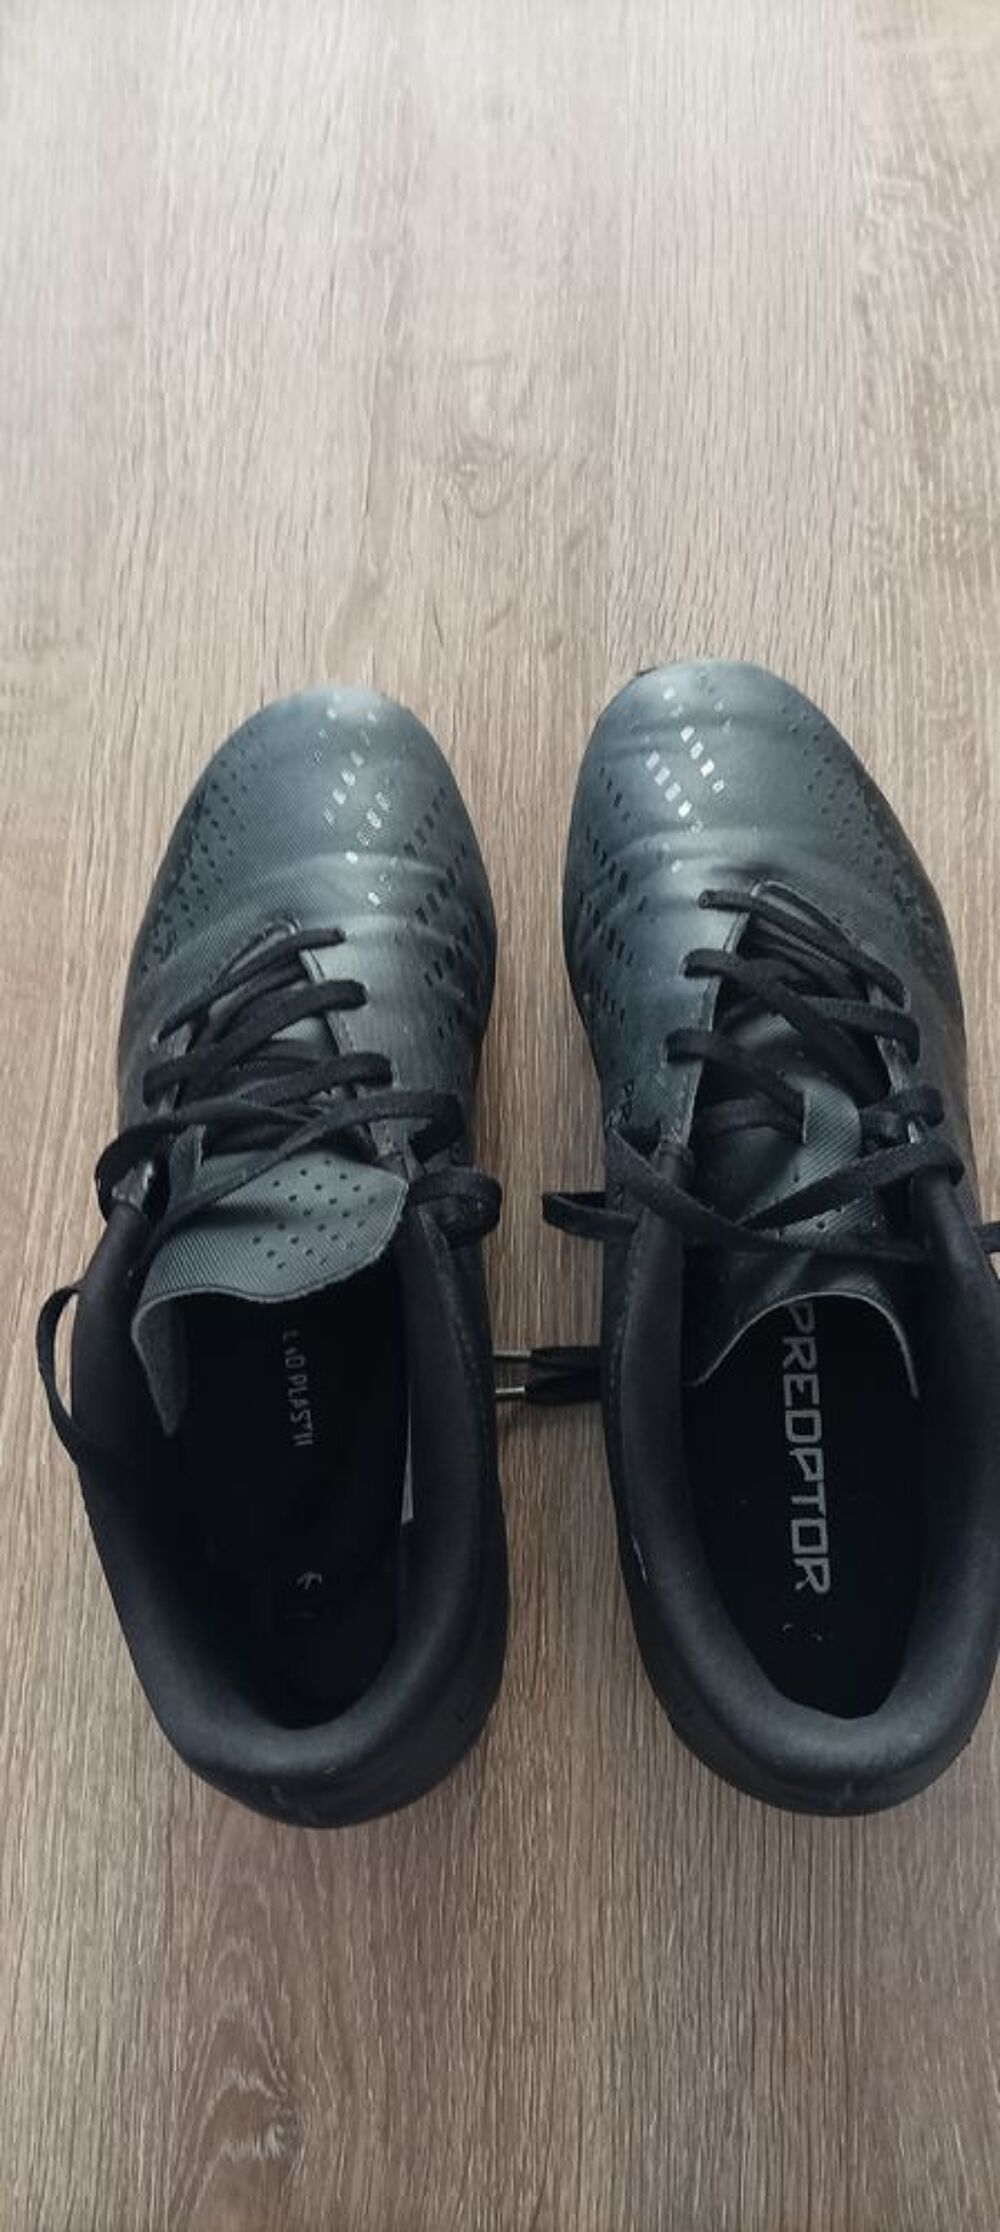 Chaussures de football marque Adidas taille 40 Chaussures